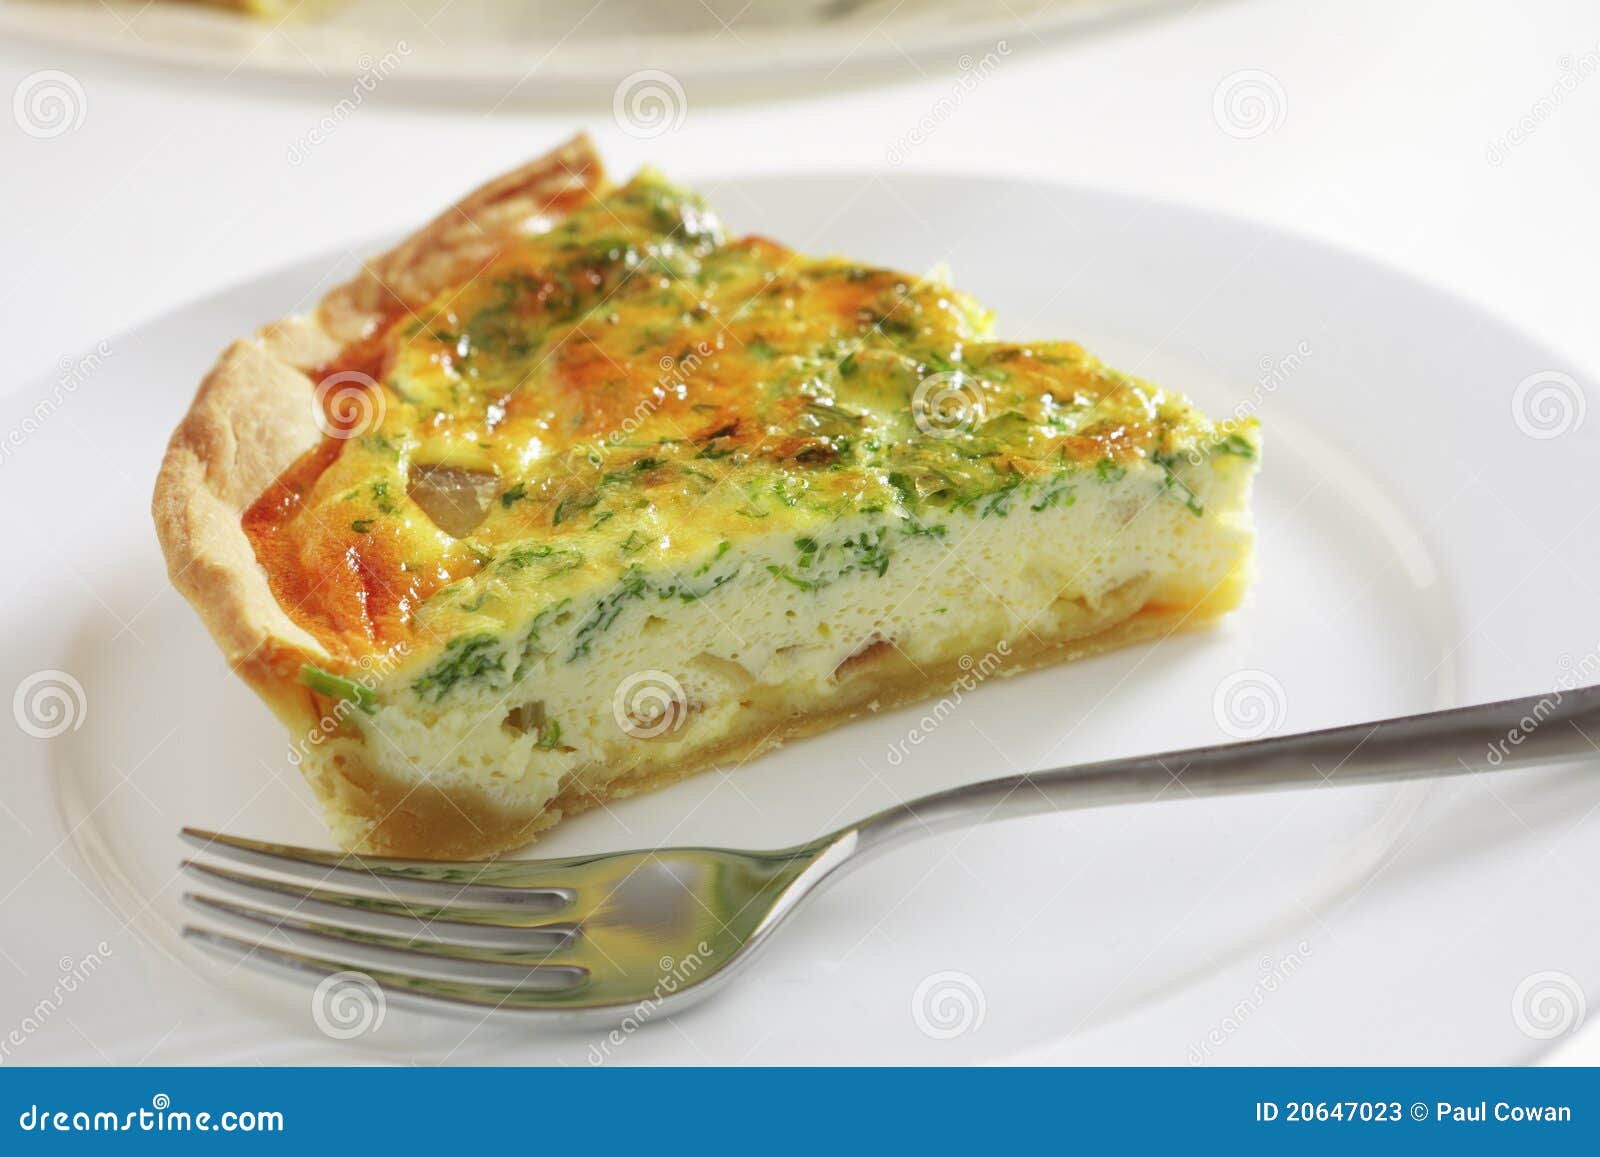 Quiche on a plate stock image. Image of plate, slice - 20647023